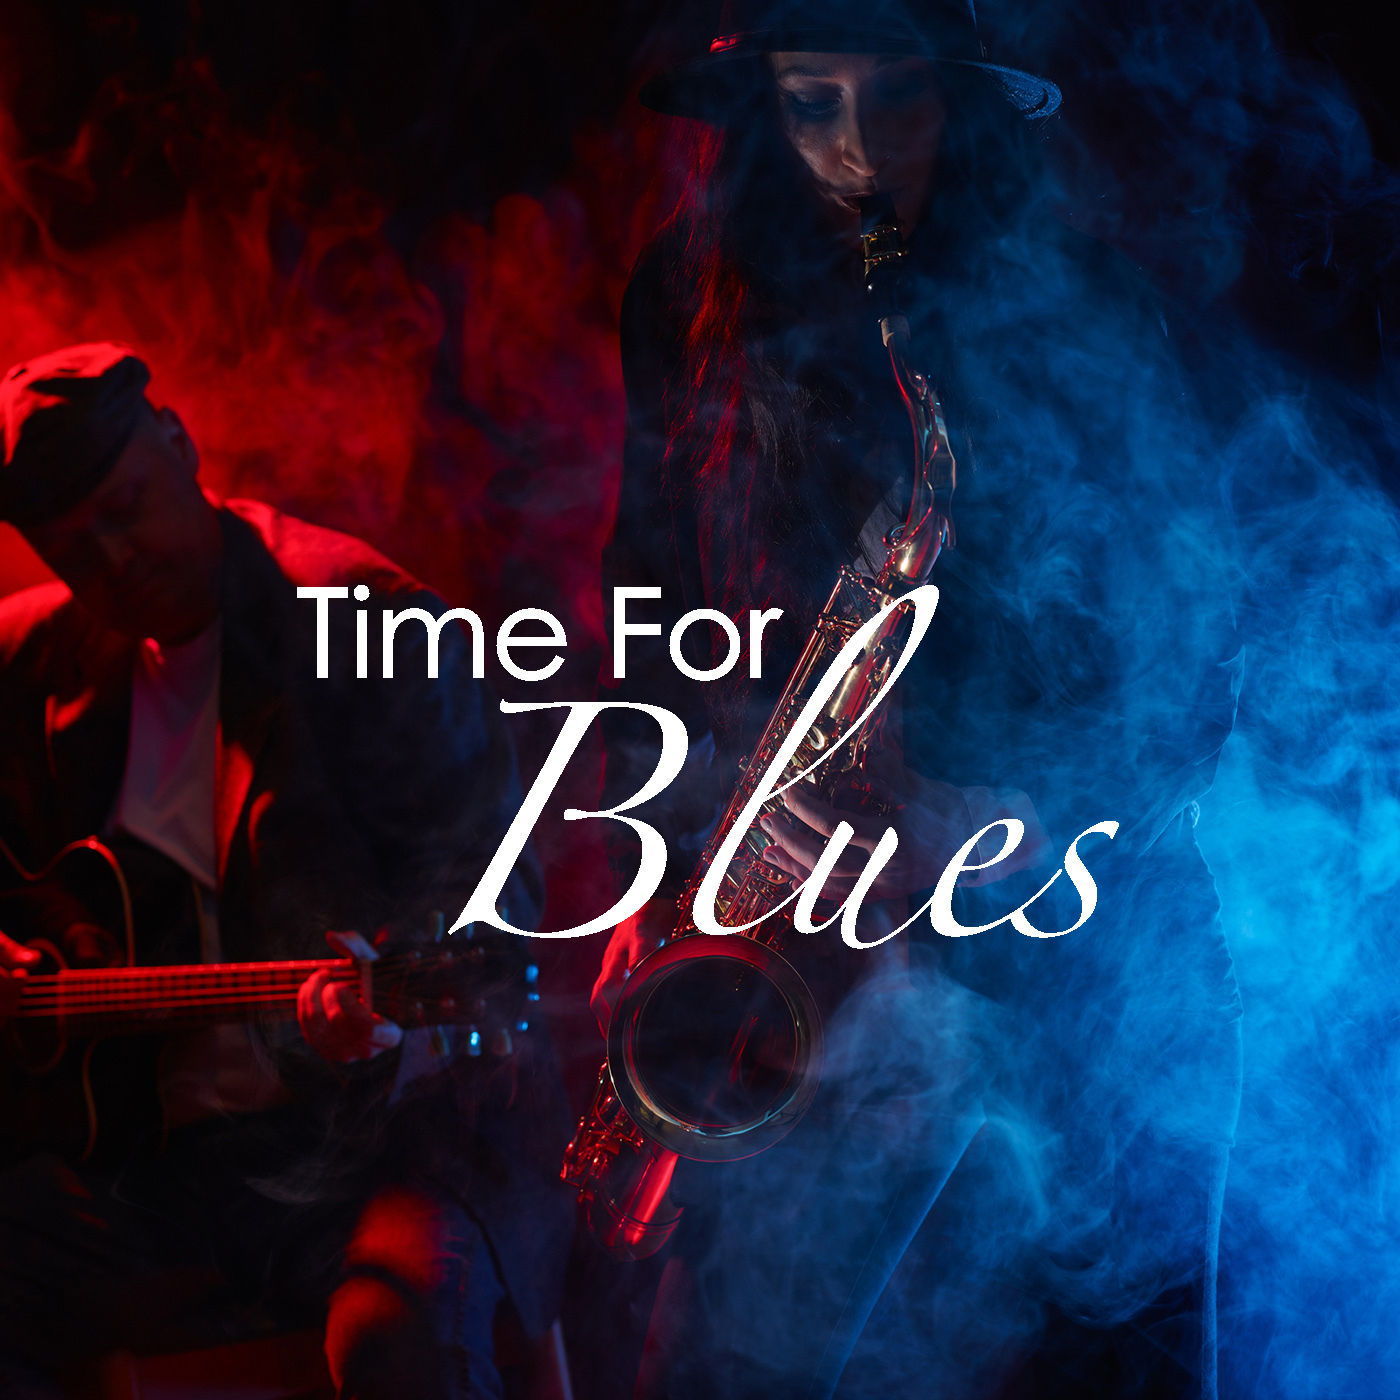 Time For Blues